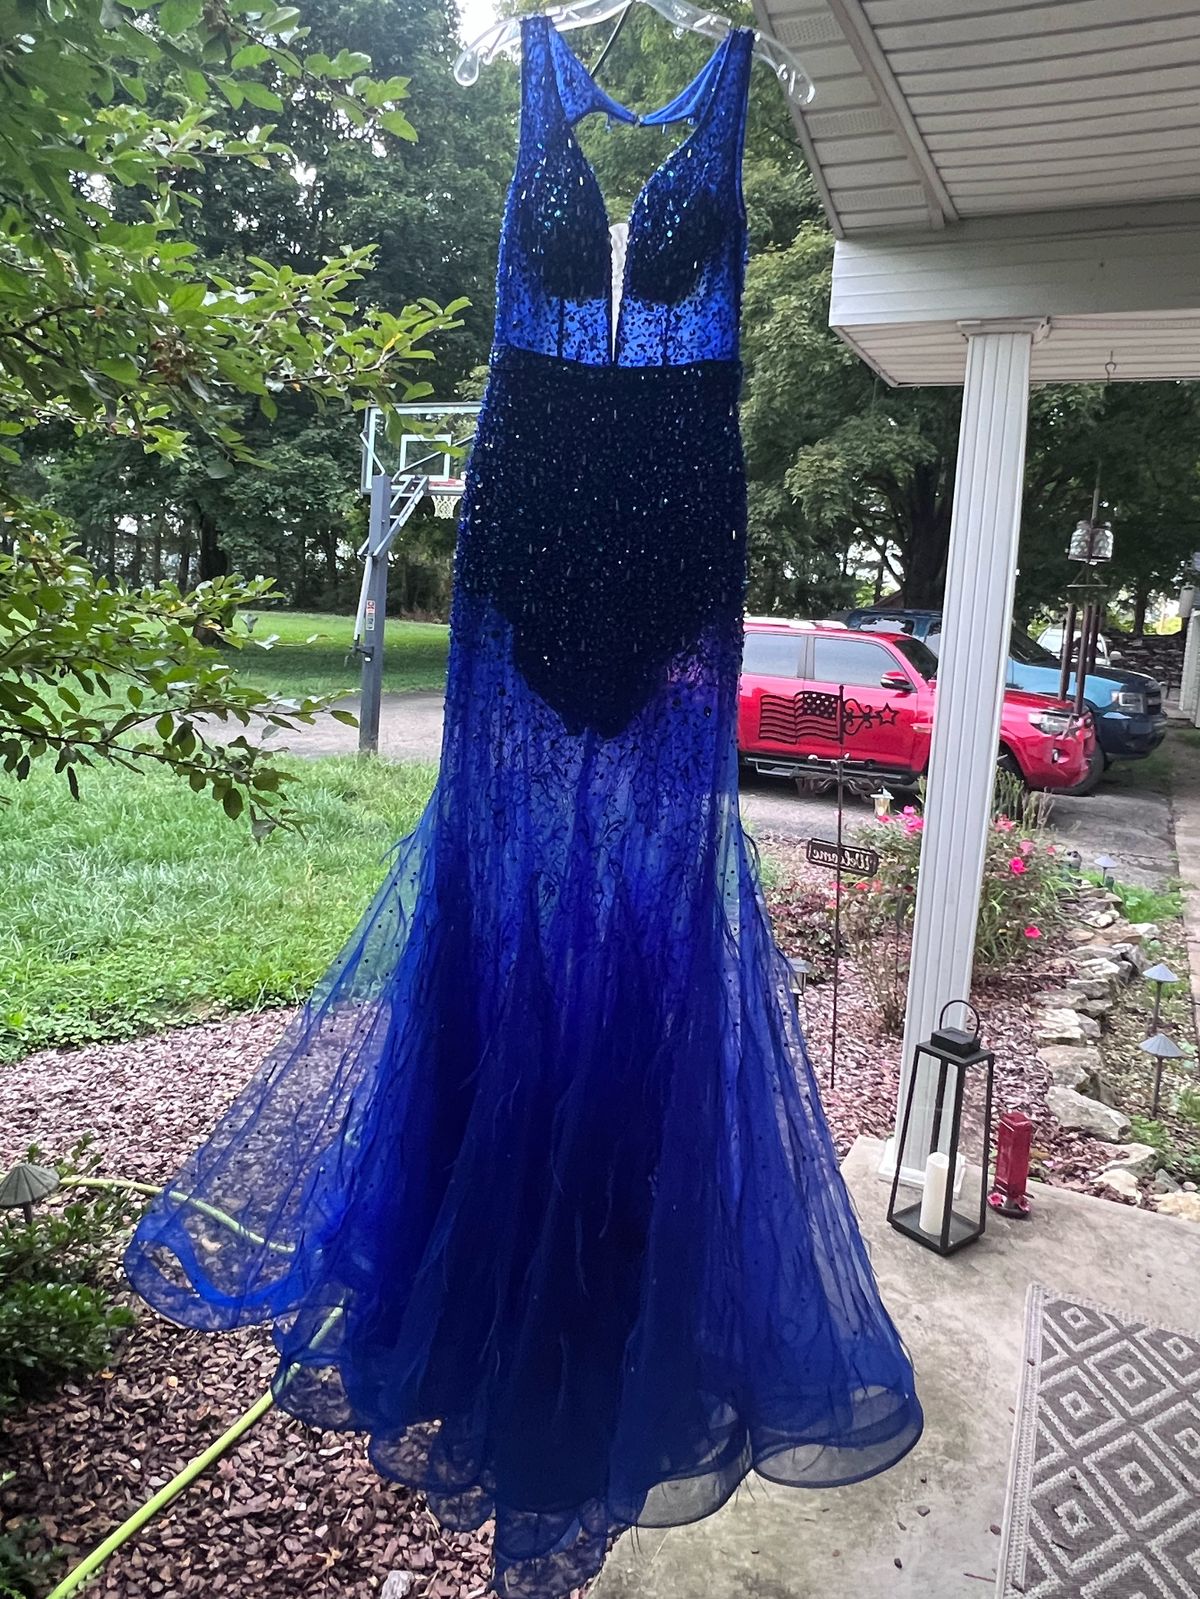 Panoply Size 6 Prom Royal Blue Mermaid Dress on Queenly